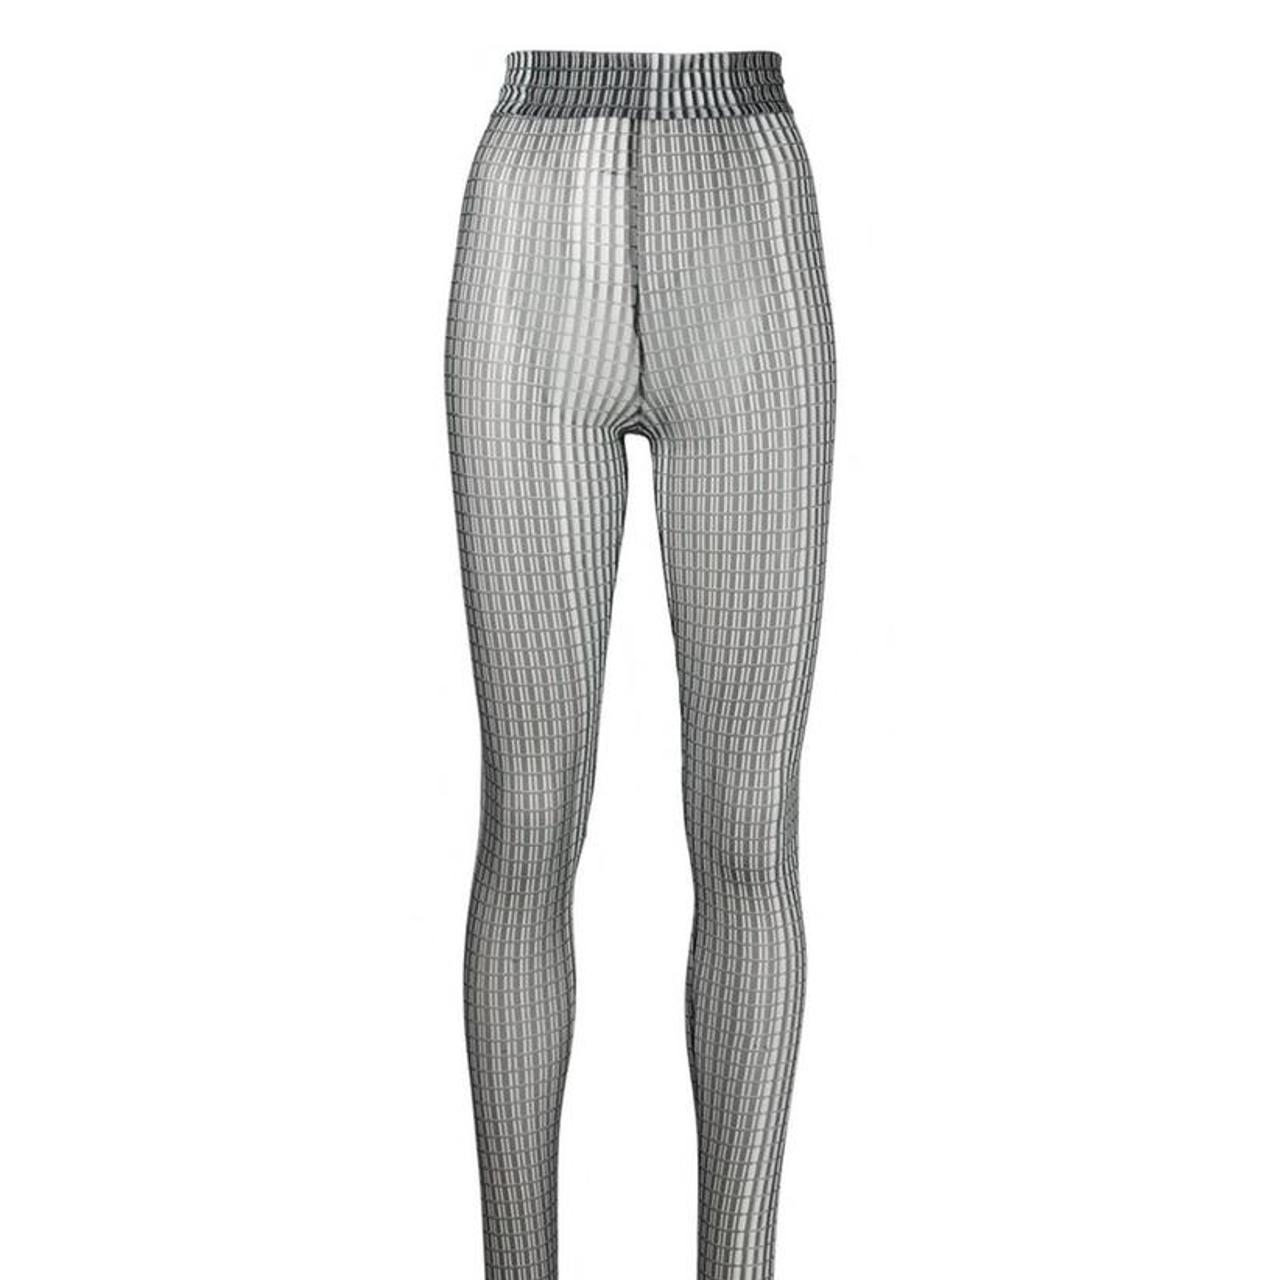 Product Image 1 - Mesh color block leggings by